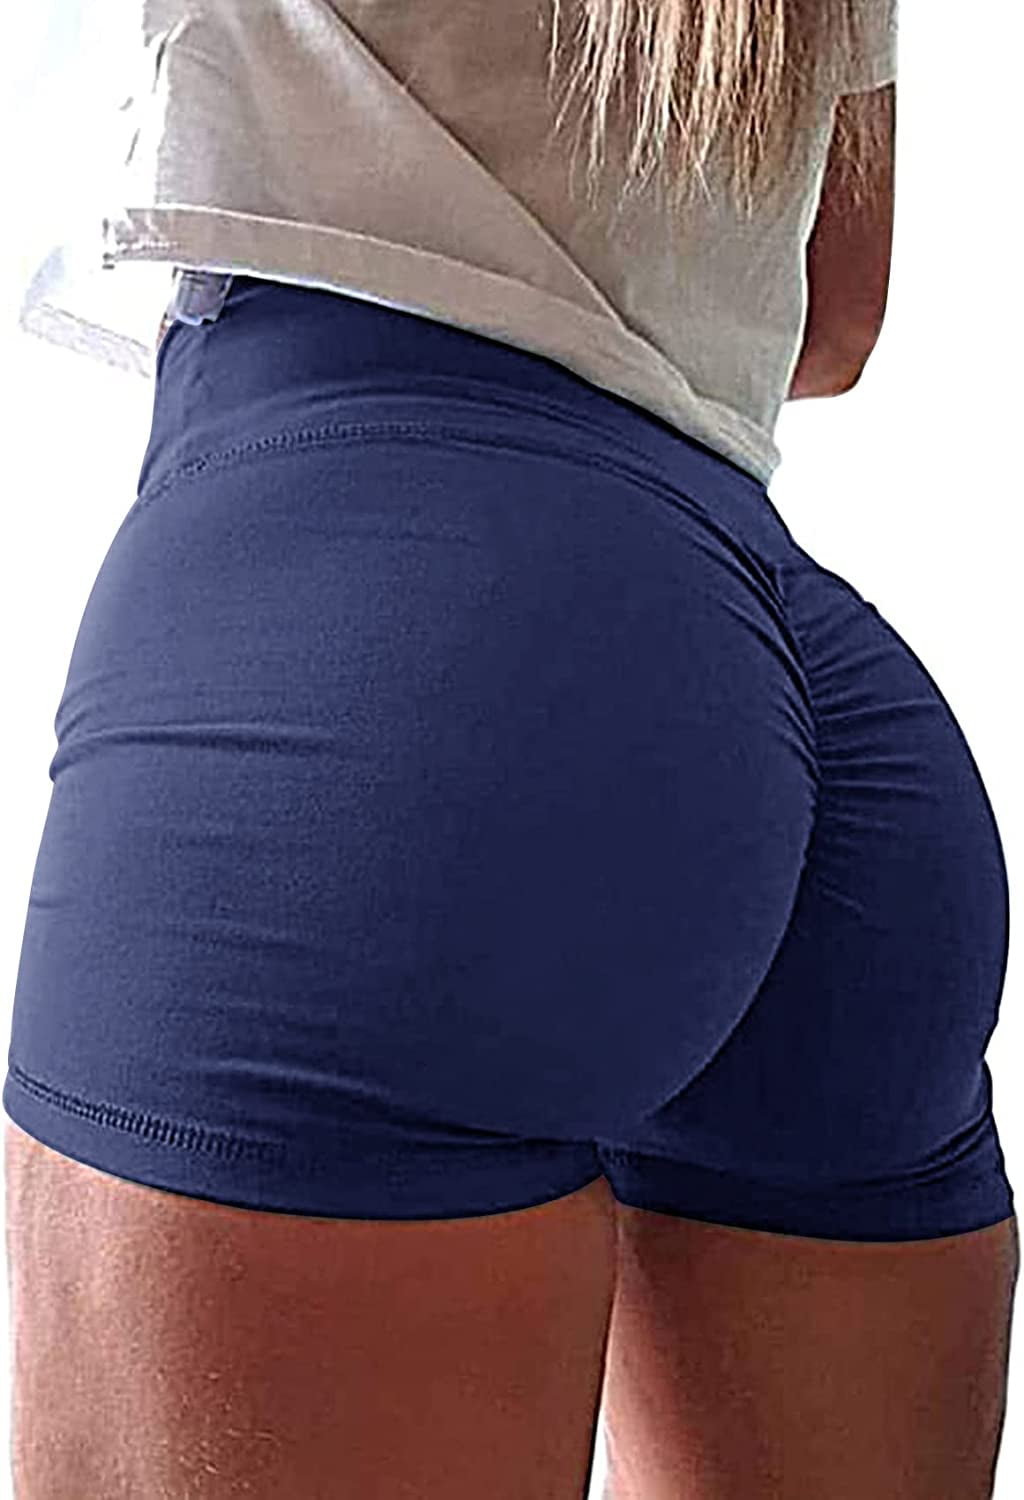 Chiccall Booty Shorts for Women Plus Size Gym Shorts High Waisted Ruffle  Skirted Shorts Workout Rave Dance Bottoms Sexy Mesh Sheer Club Mini Hot  Pants